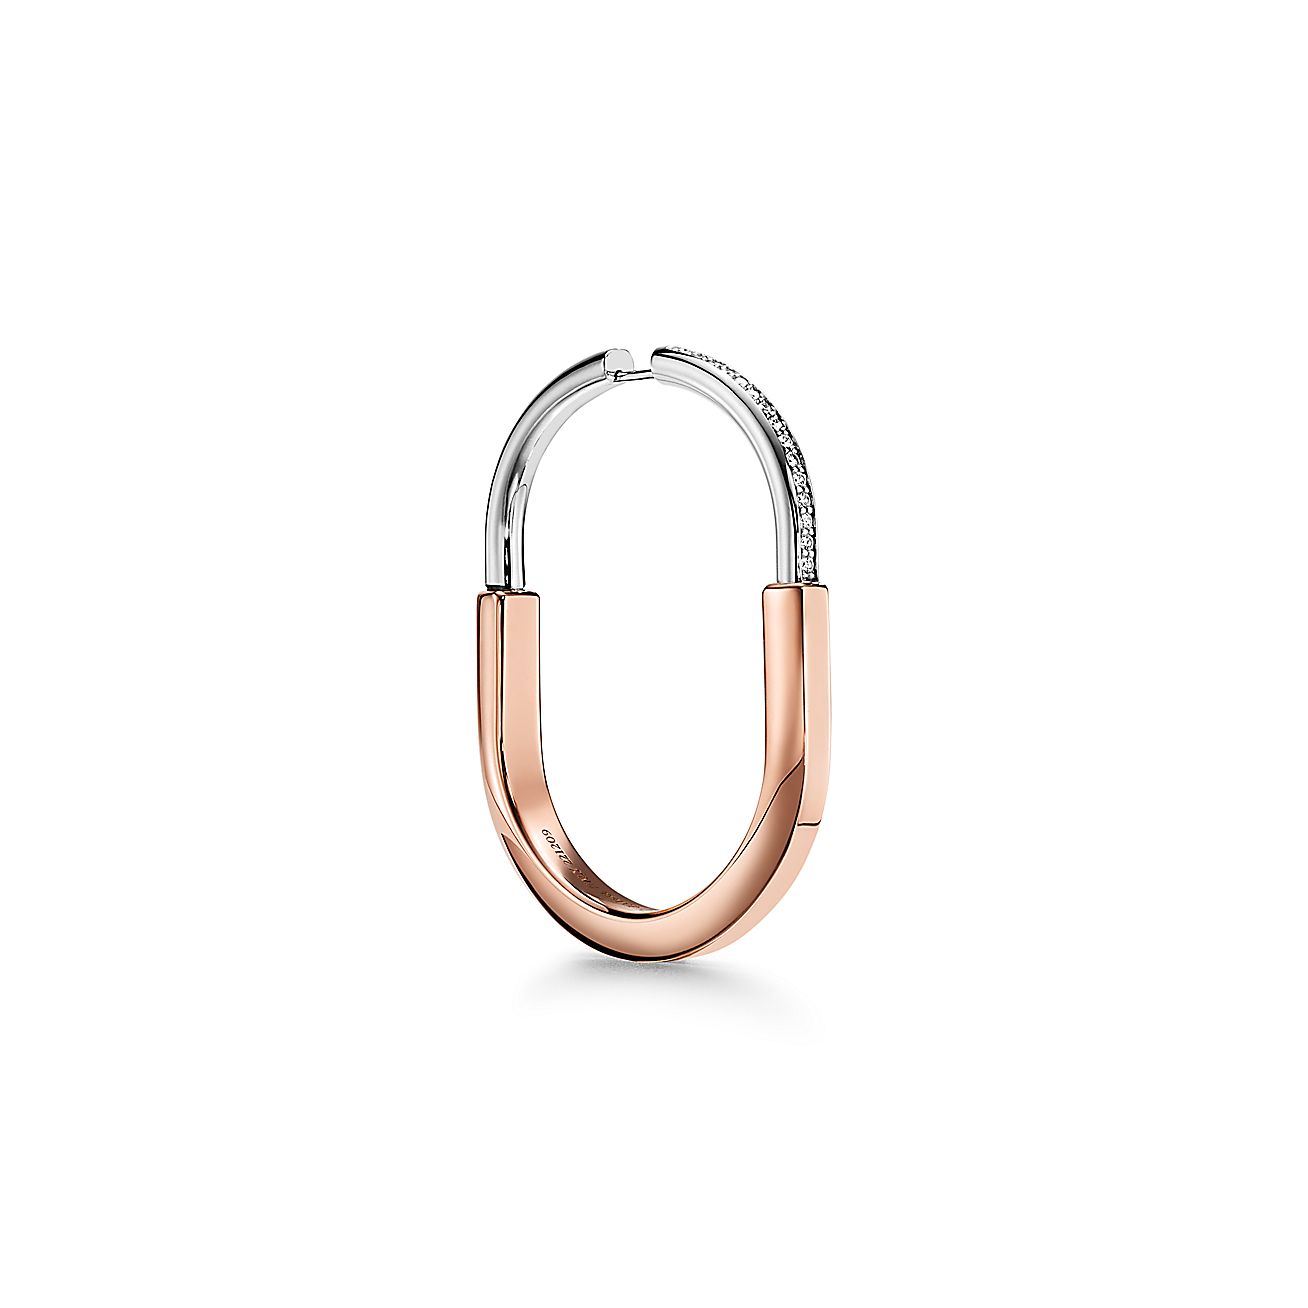 Tiffany Lock Pendant in Rose and White Gold with Diamonds, Extra